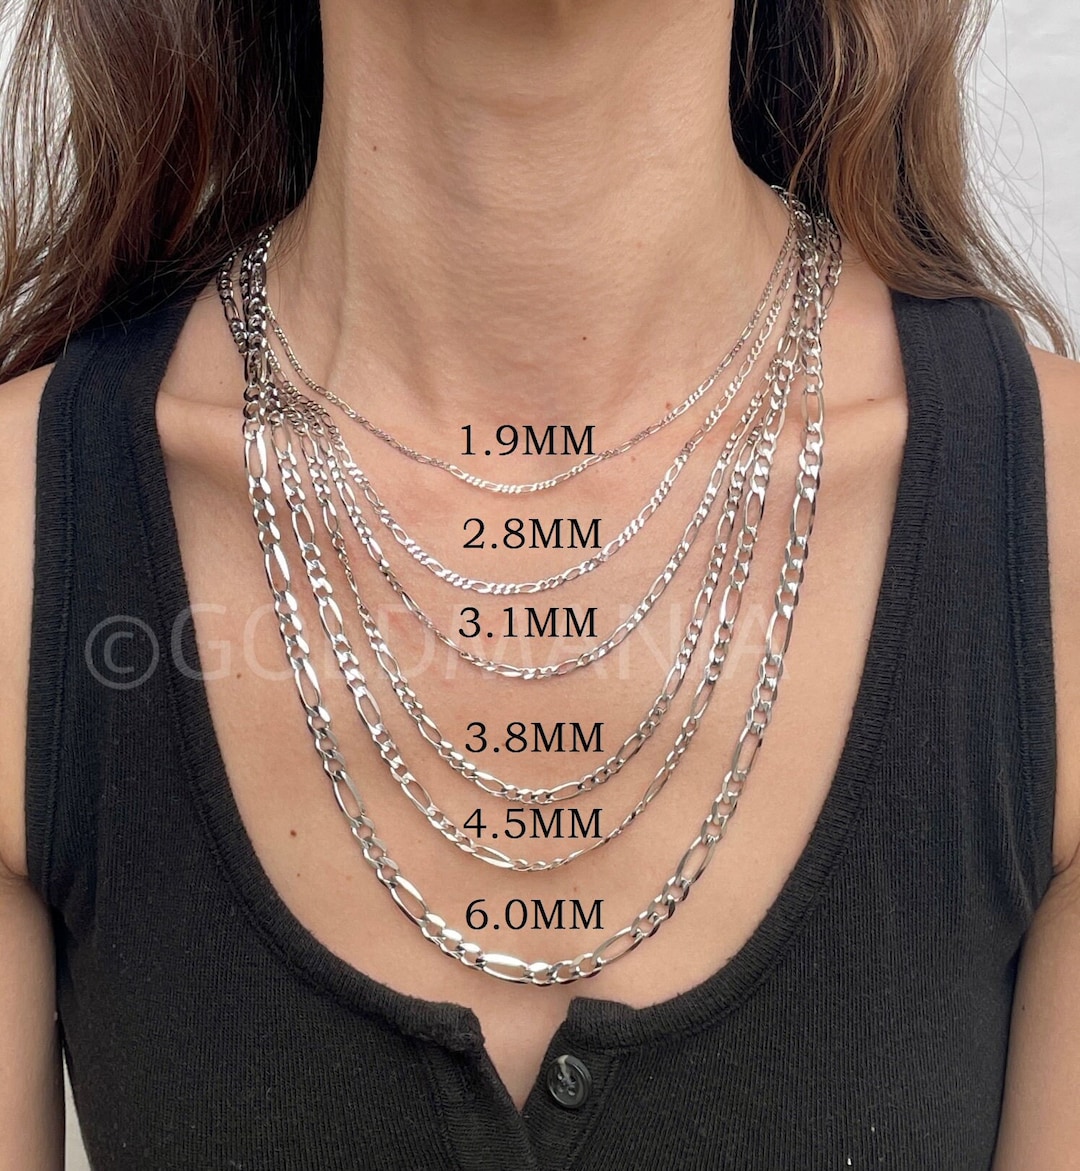 30mm Figaro Link Necklace Chain